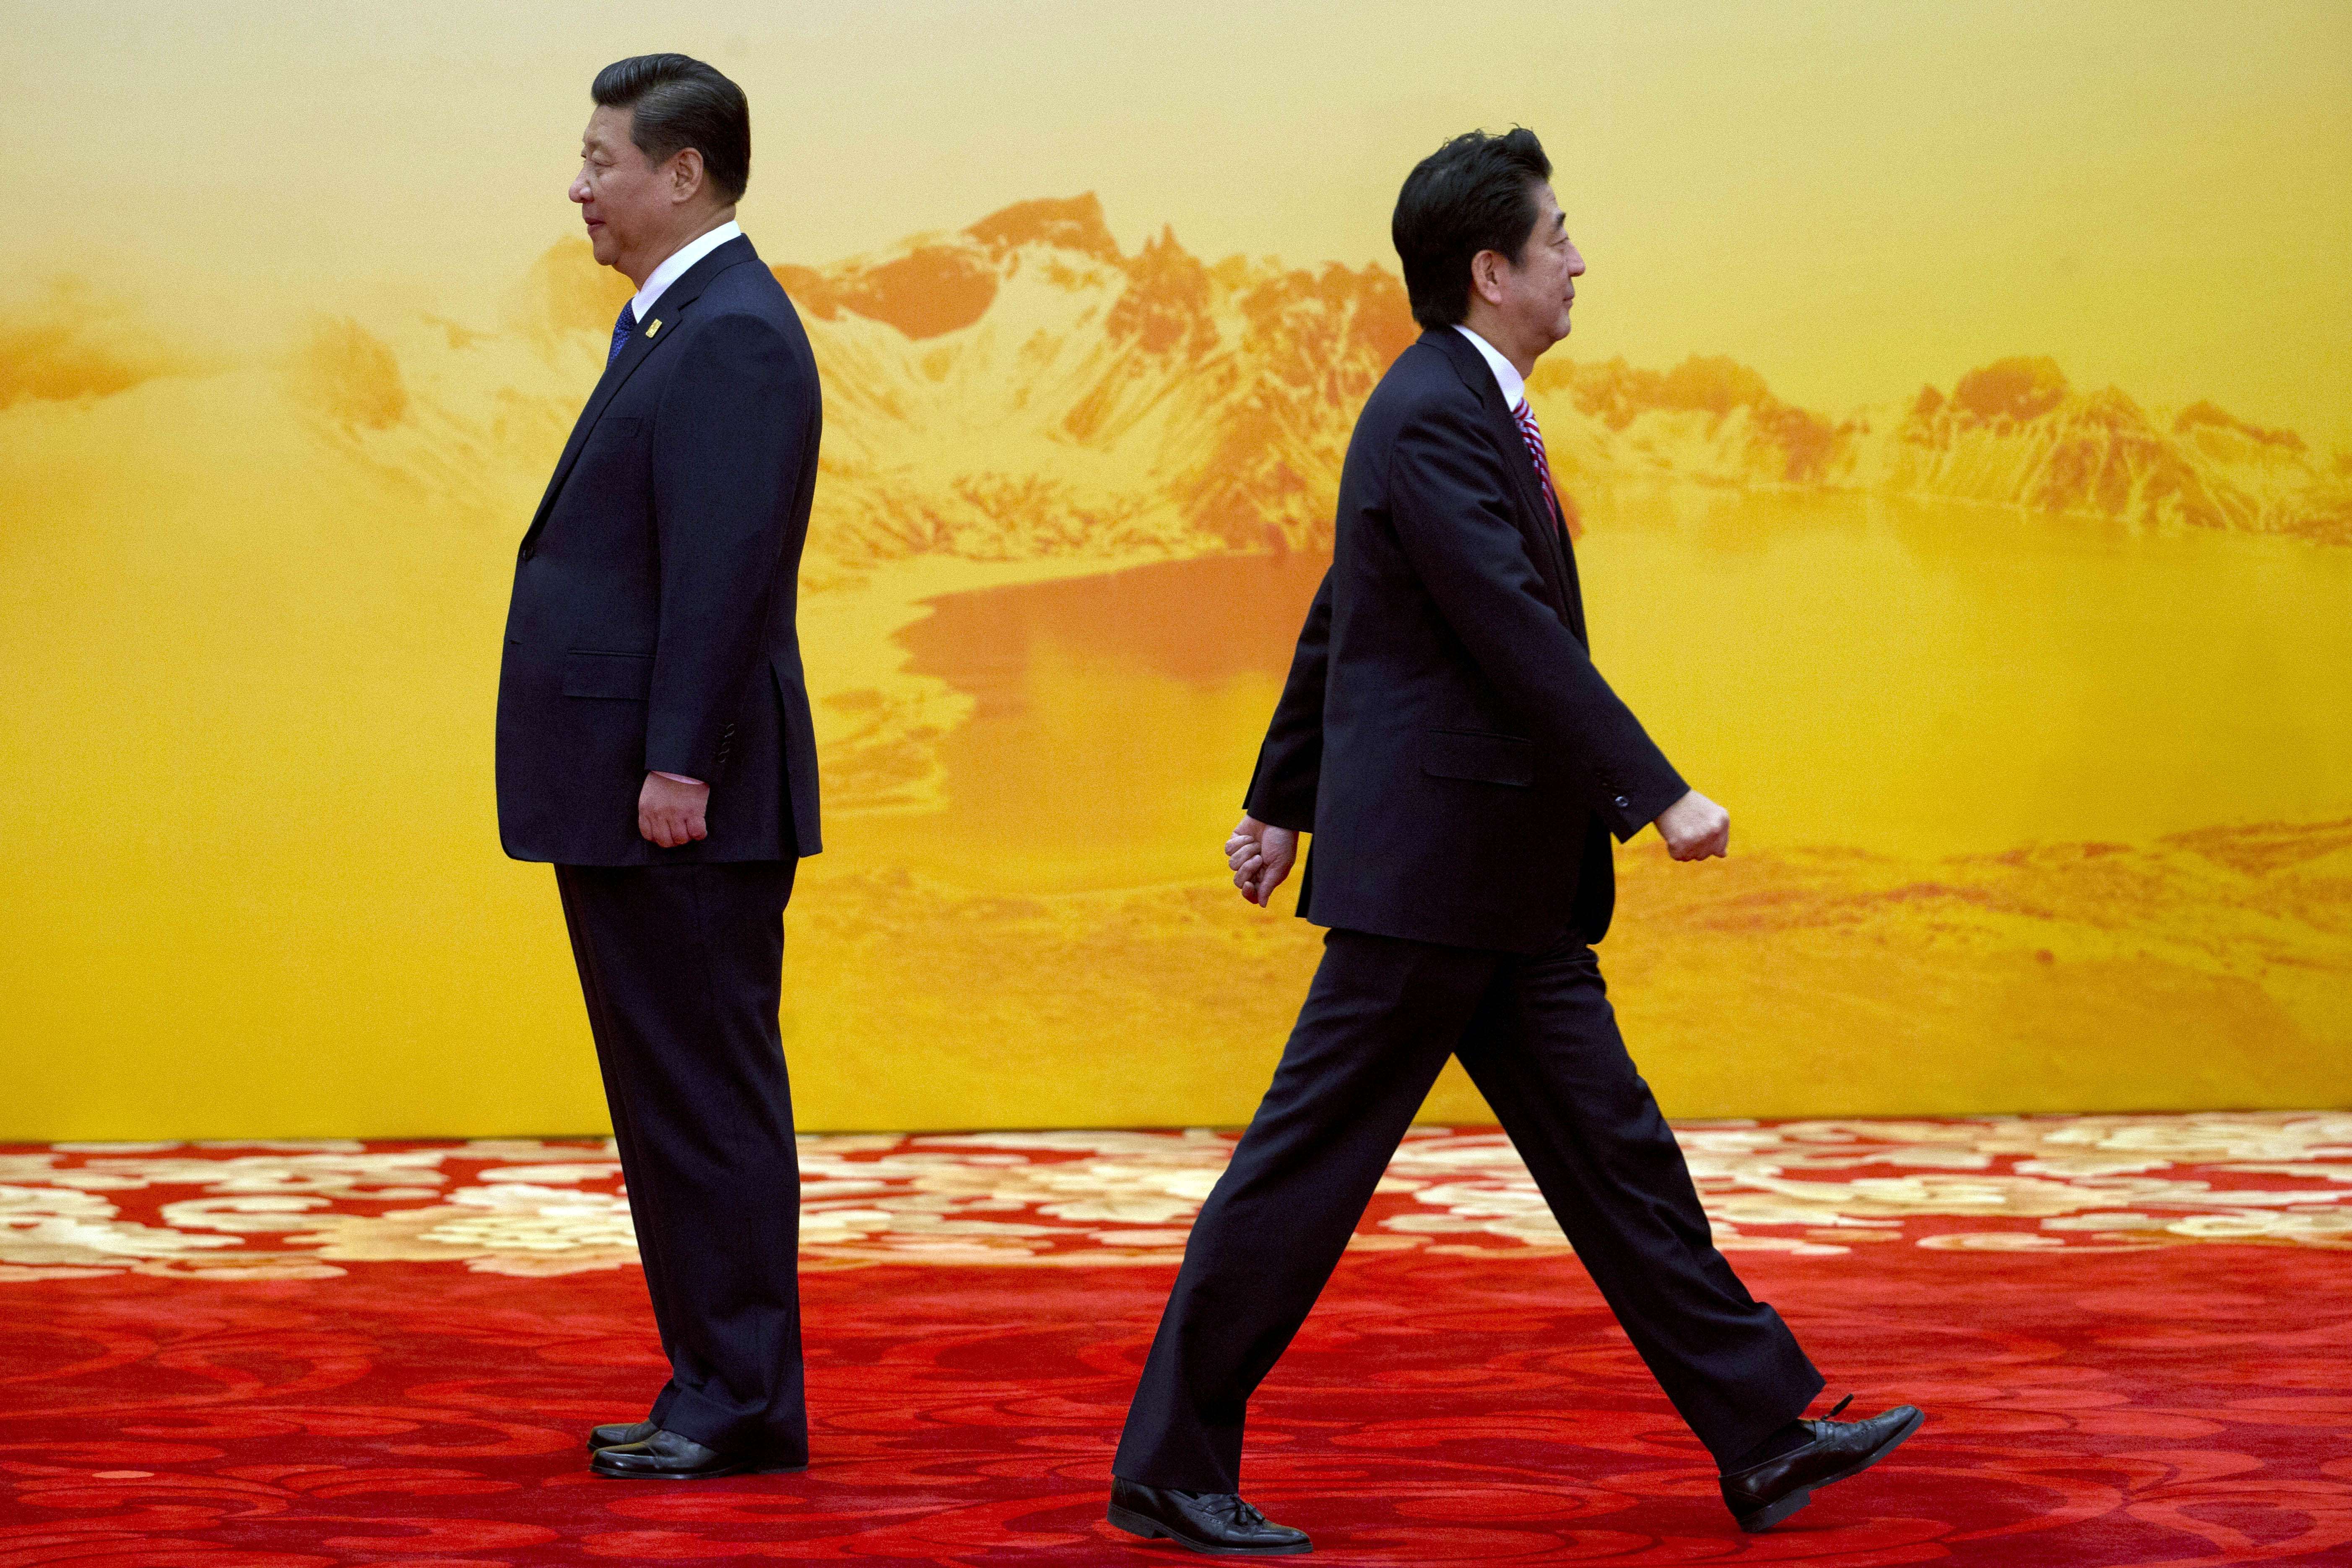 Continuing a series of stories on China’s relations with other G20 members ahead of next month’s G20 summit, the South China Morning Post looks at the strained relationship between President Xi Jinping and Japanese Prime Minister Shinzo Abe